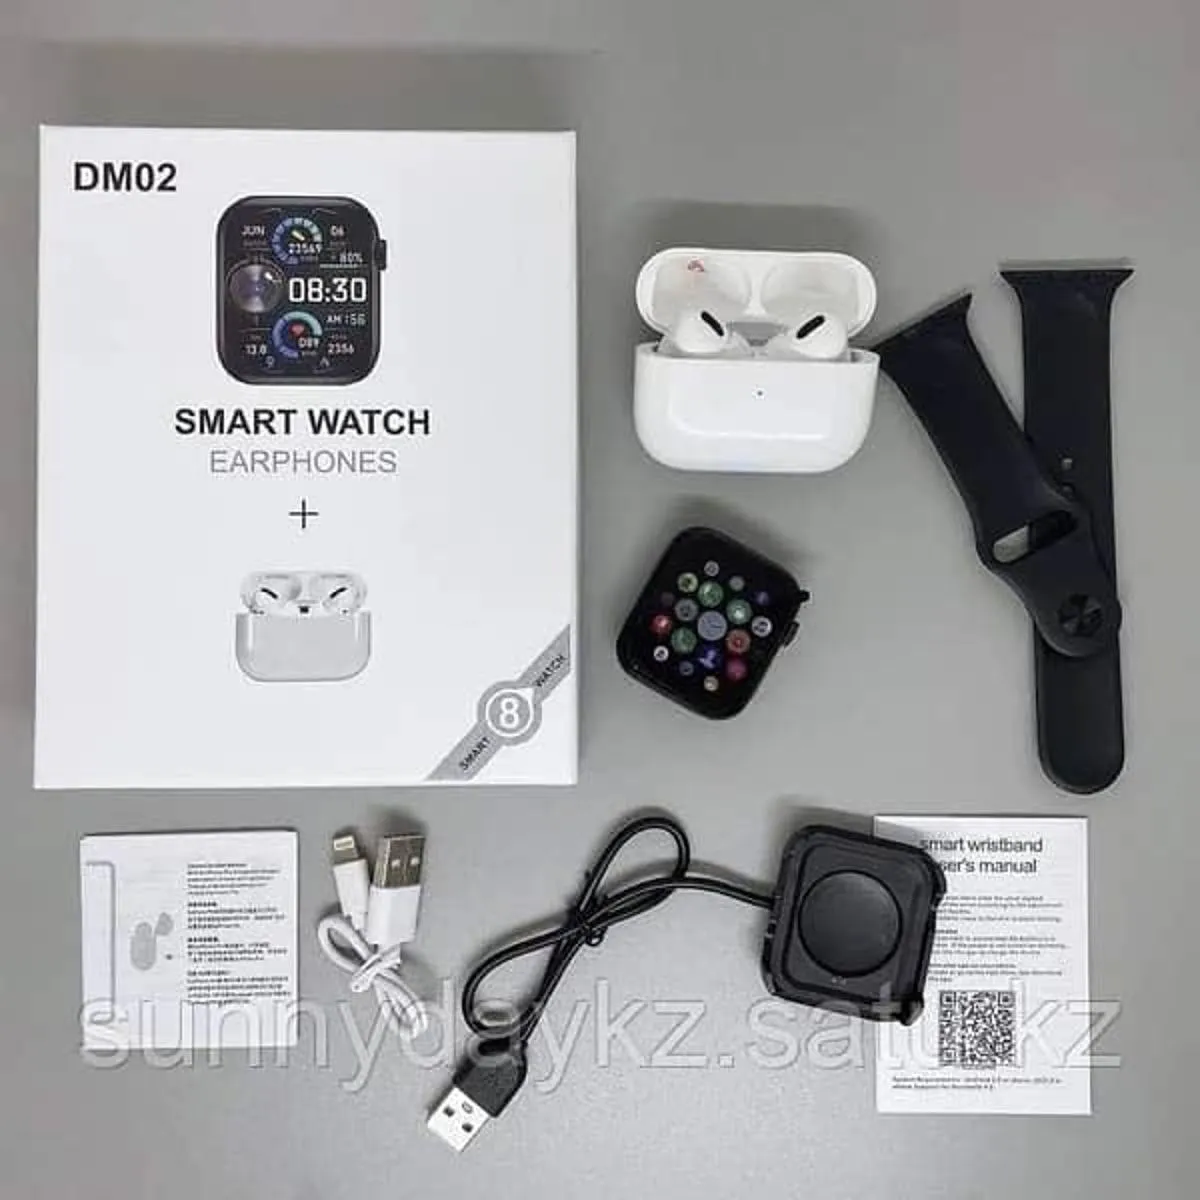 Buy DM02 Smart watch with earbuds at best price in Pakistan | Rhizmall.pk